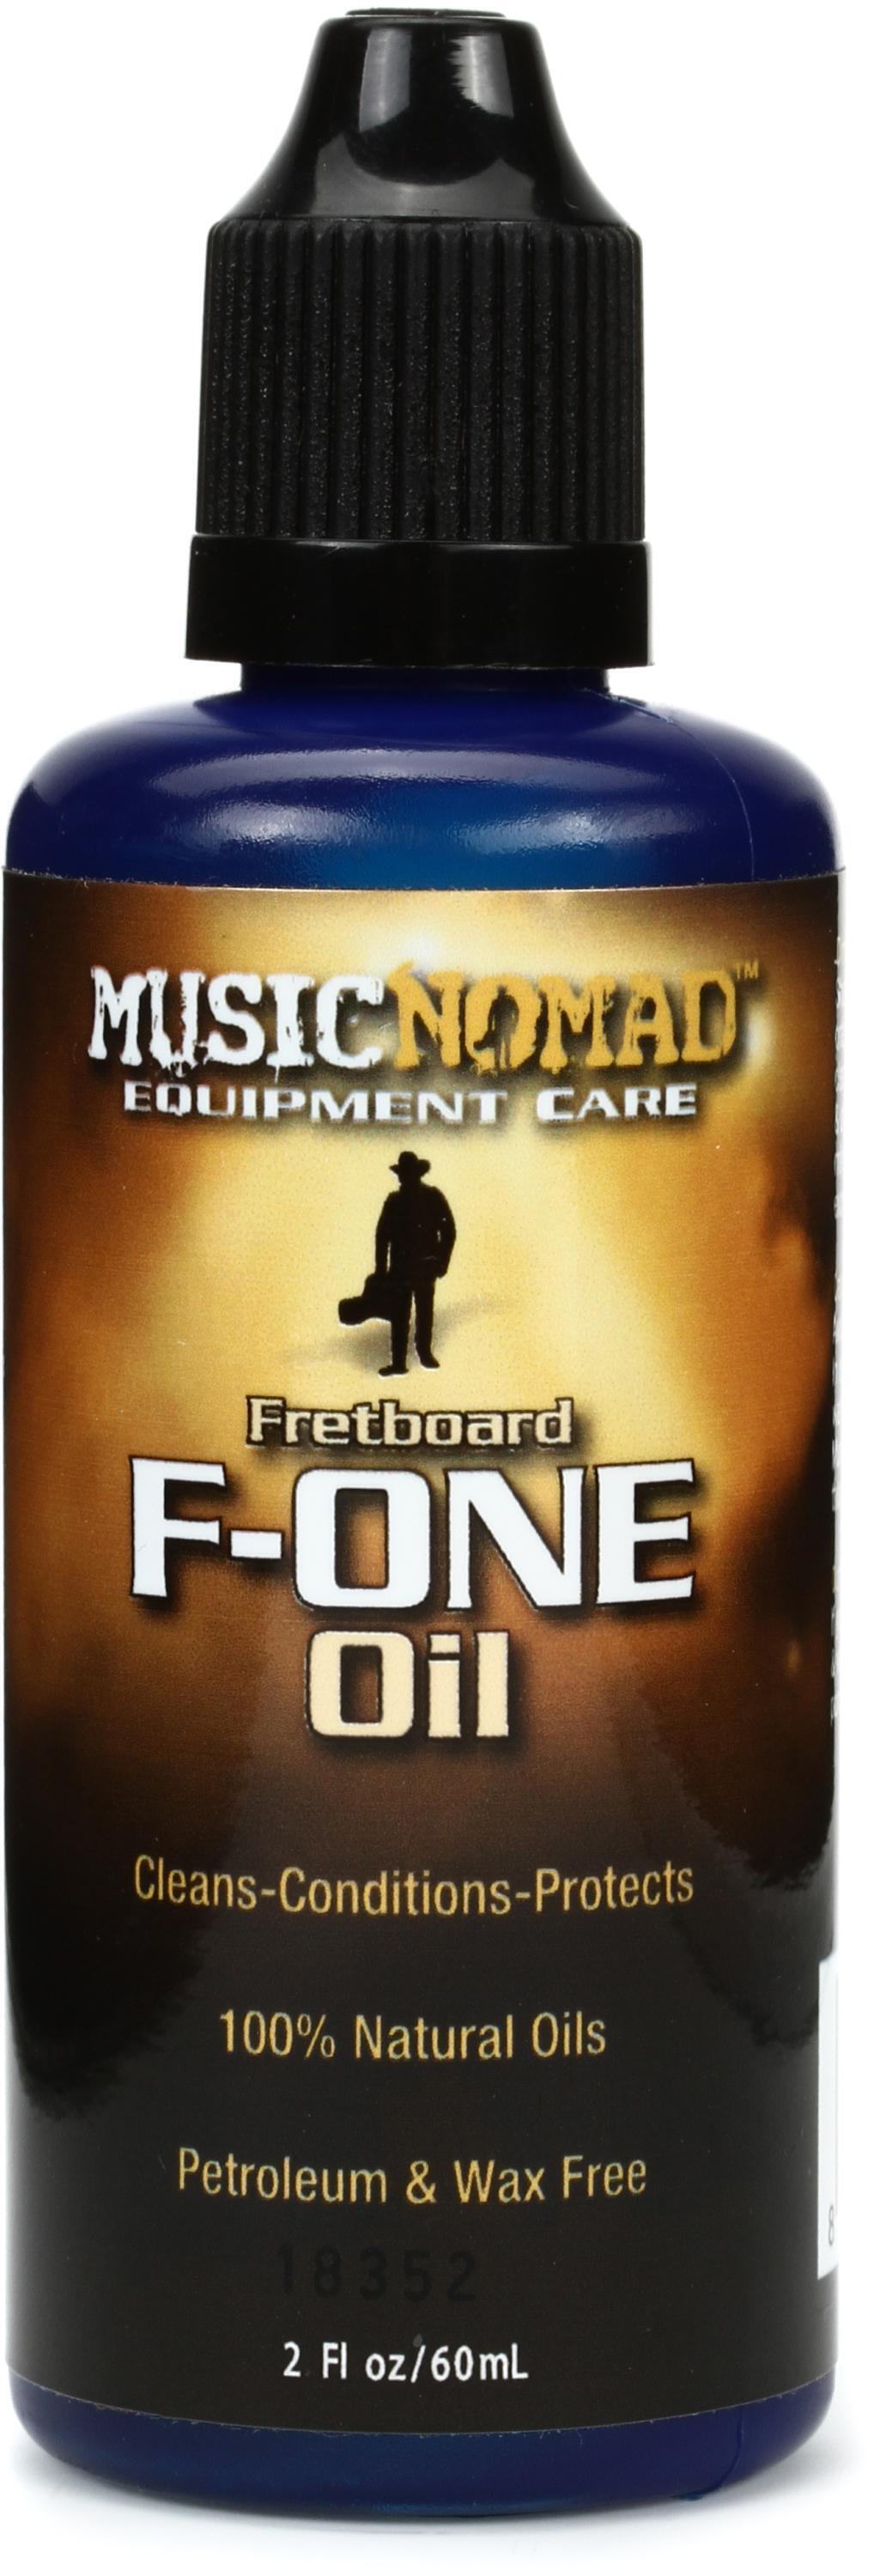 Music Nomad Fretboard F-One Oil - Savage Classical Guitar